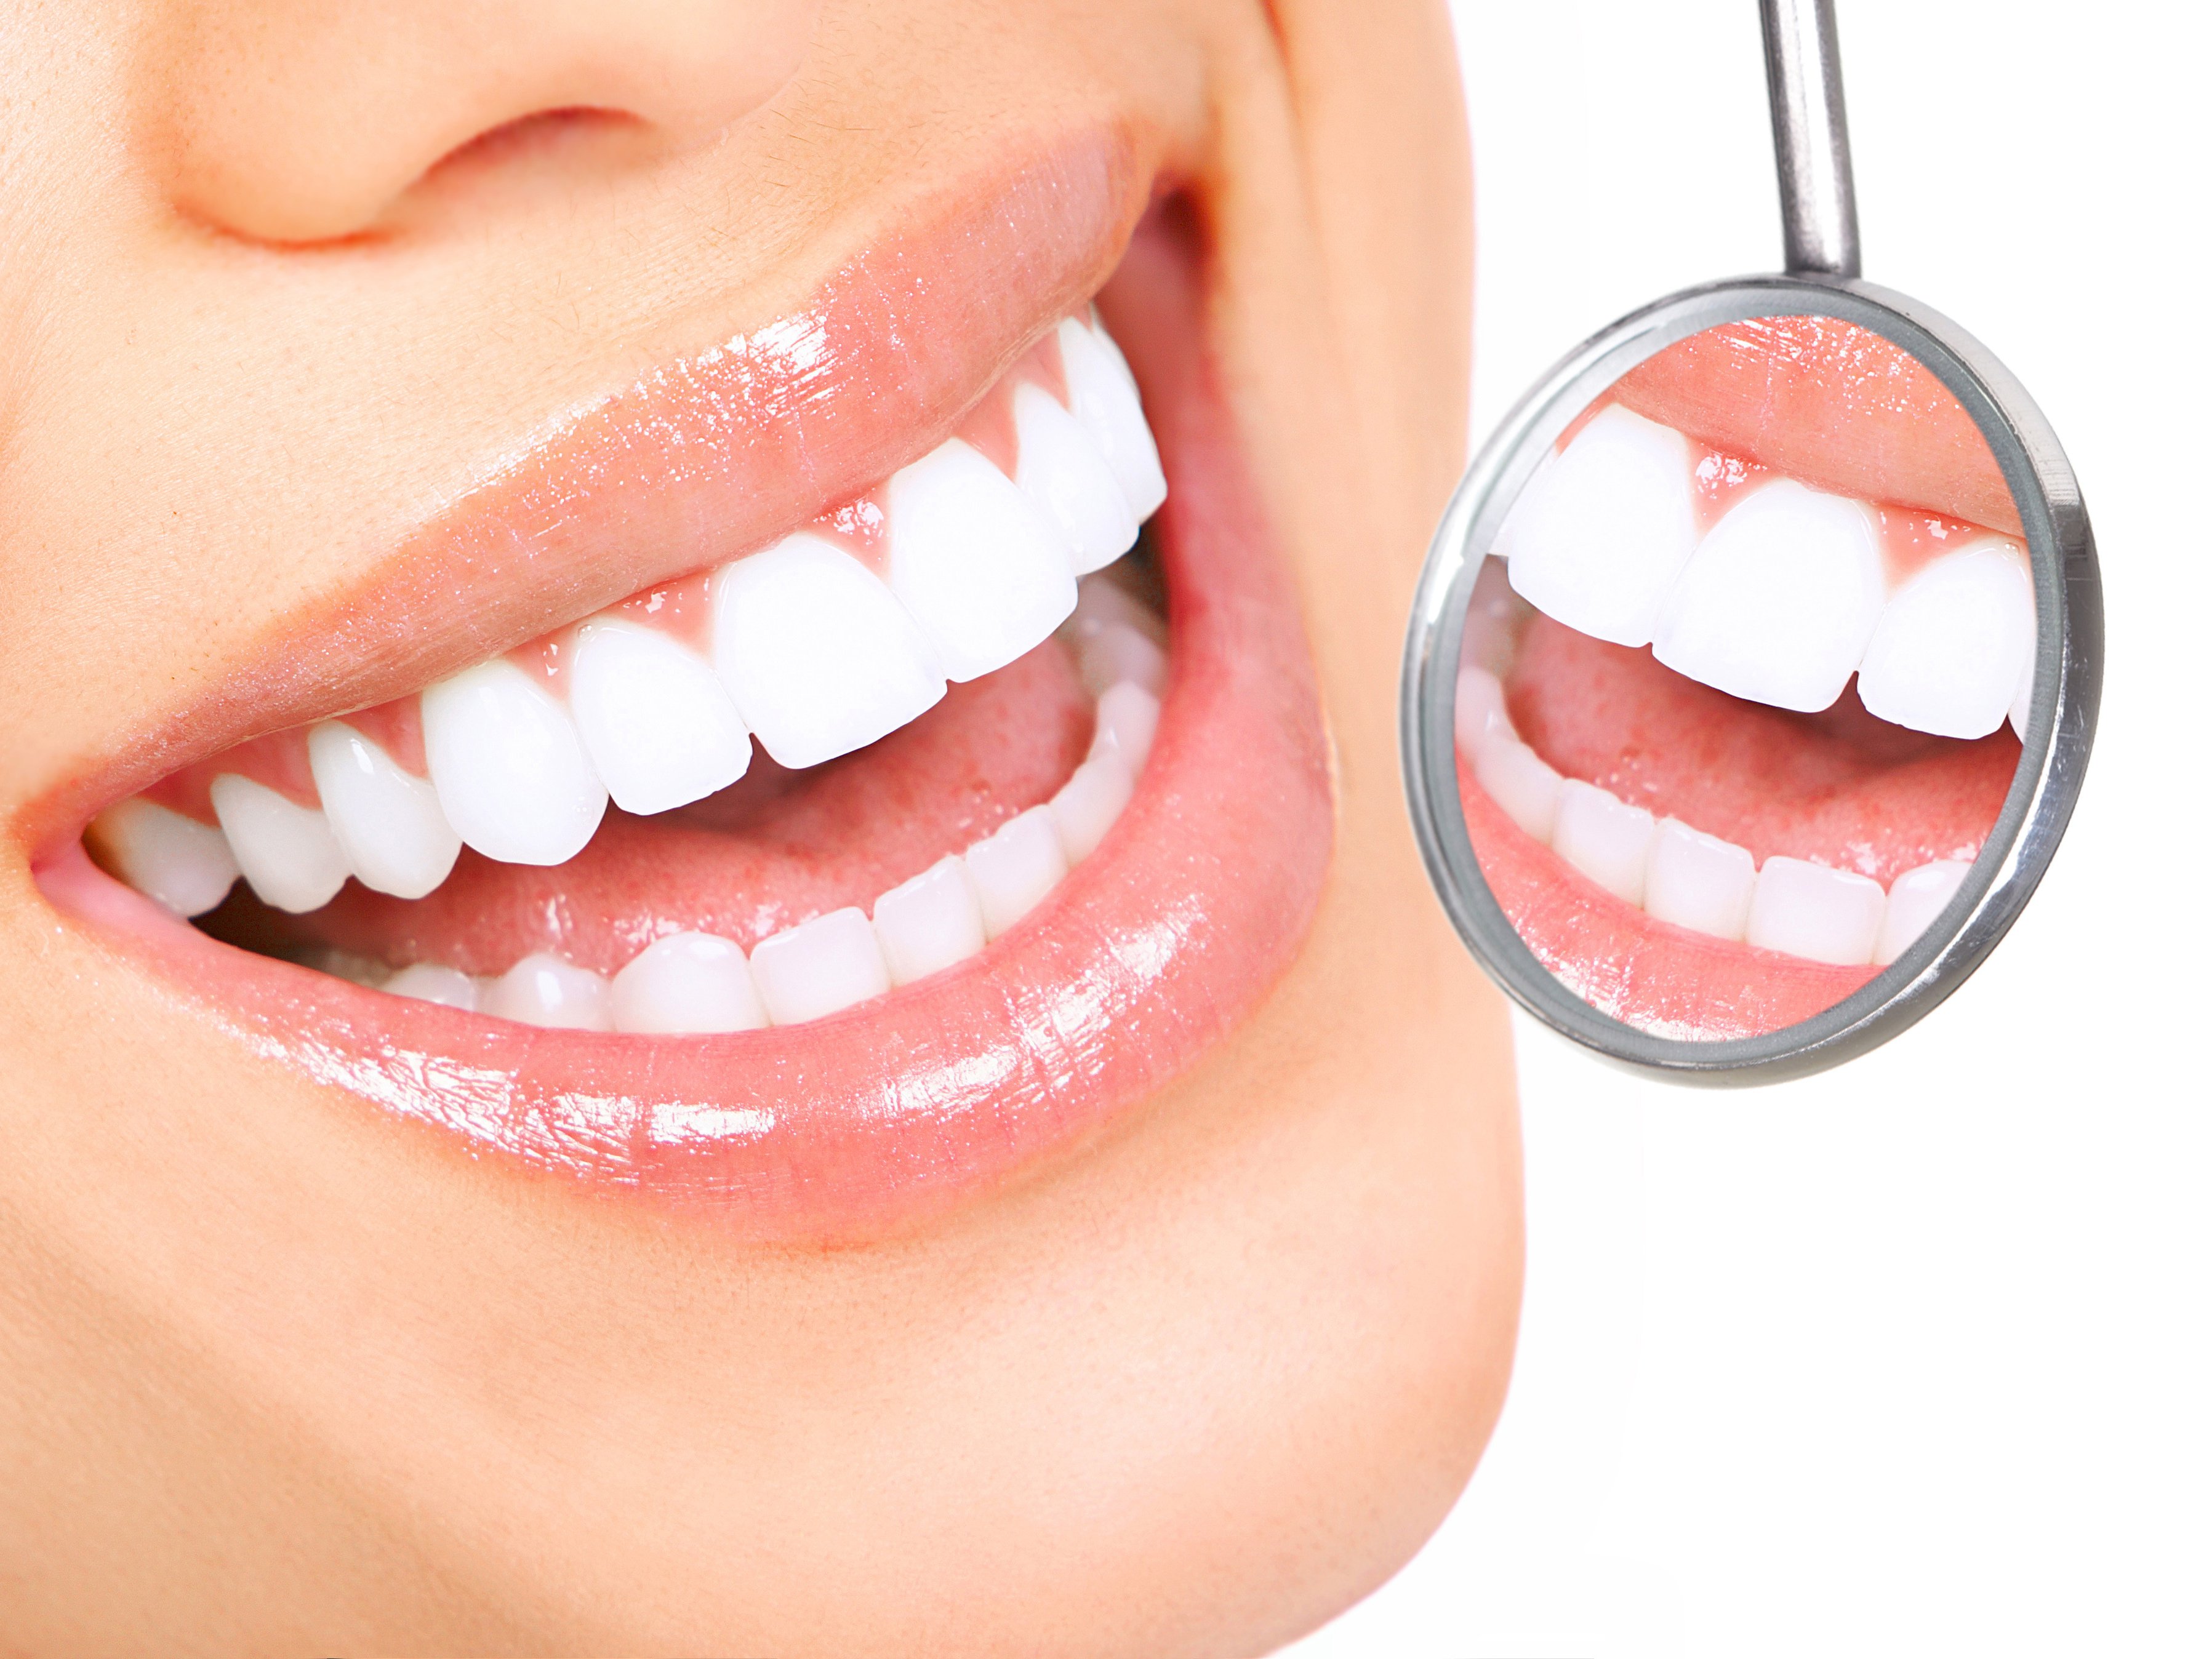 6 Tips for Whitening Your Teeth